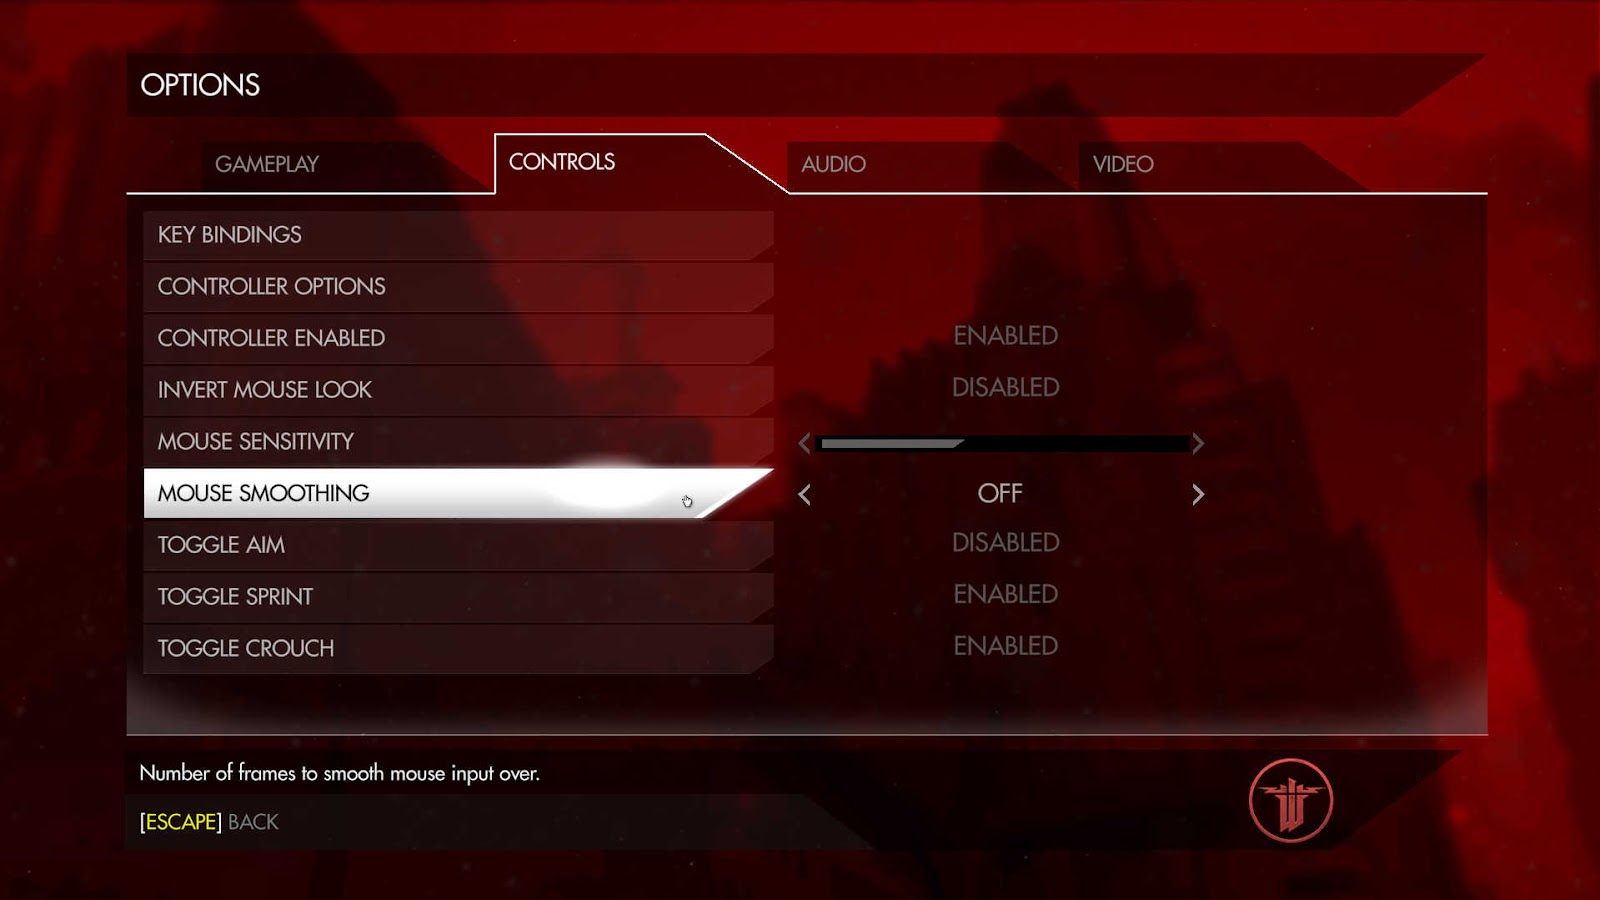 Controller disable, invert mouse aim, mouse sensitivity and mouse smoothing, toggles for aim, sprint and crouch.